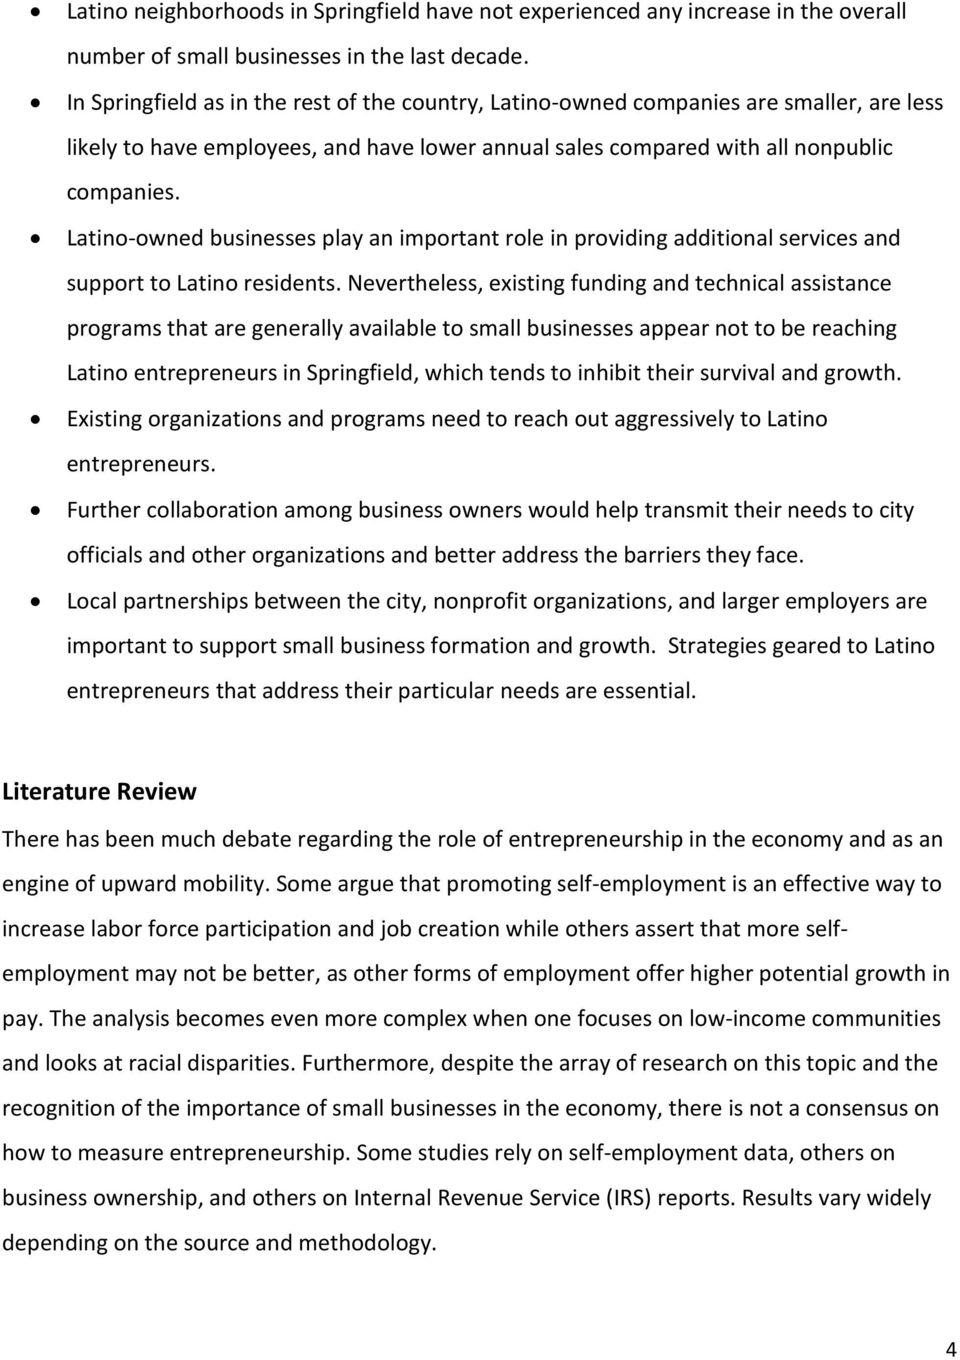 Latino-owned businesses play an important role in providing additional services and support to Latino residents.